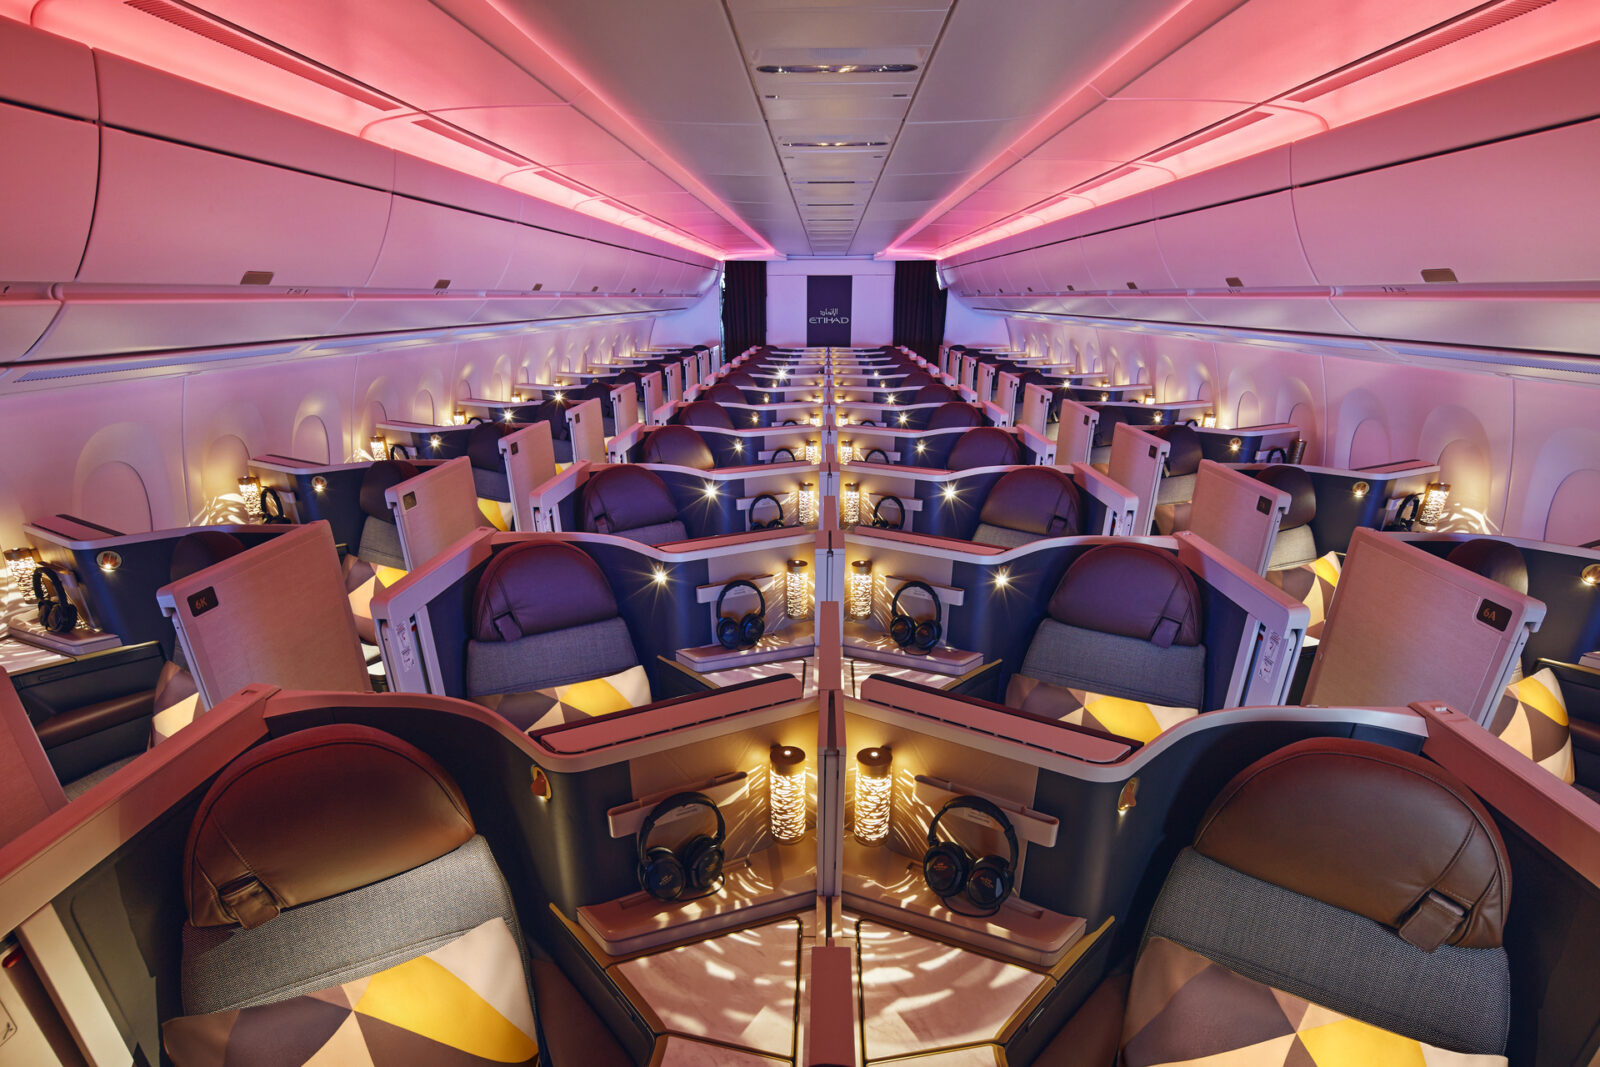 inside a plane with rows of seats